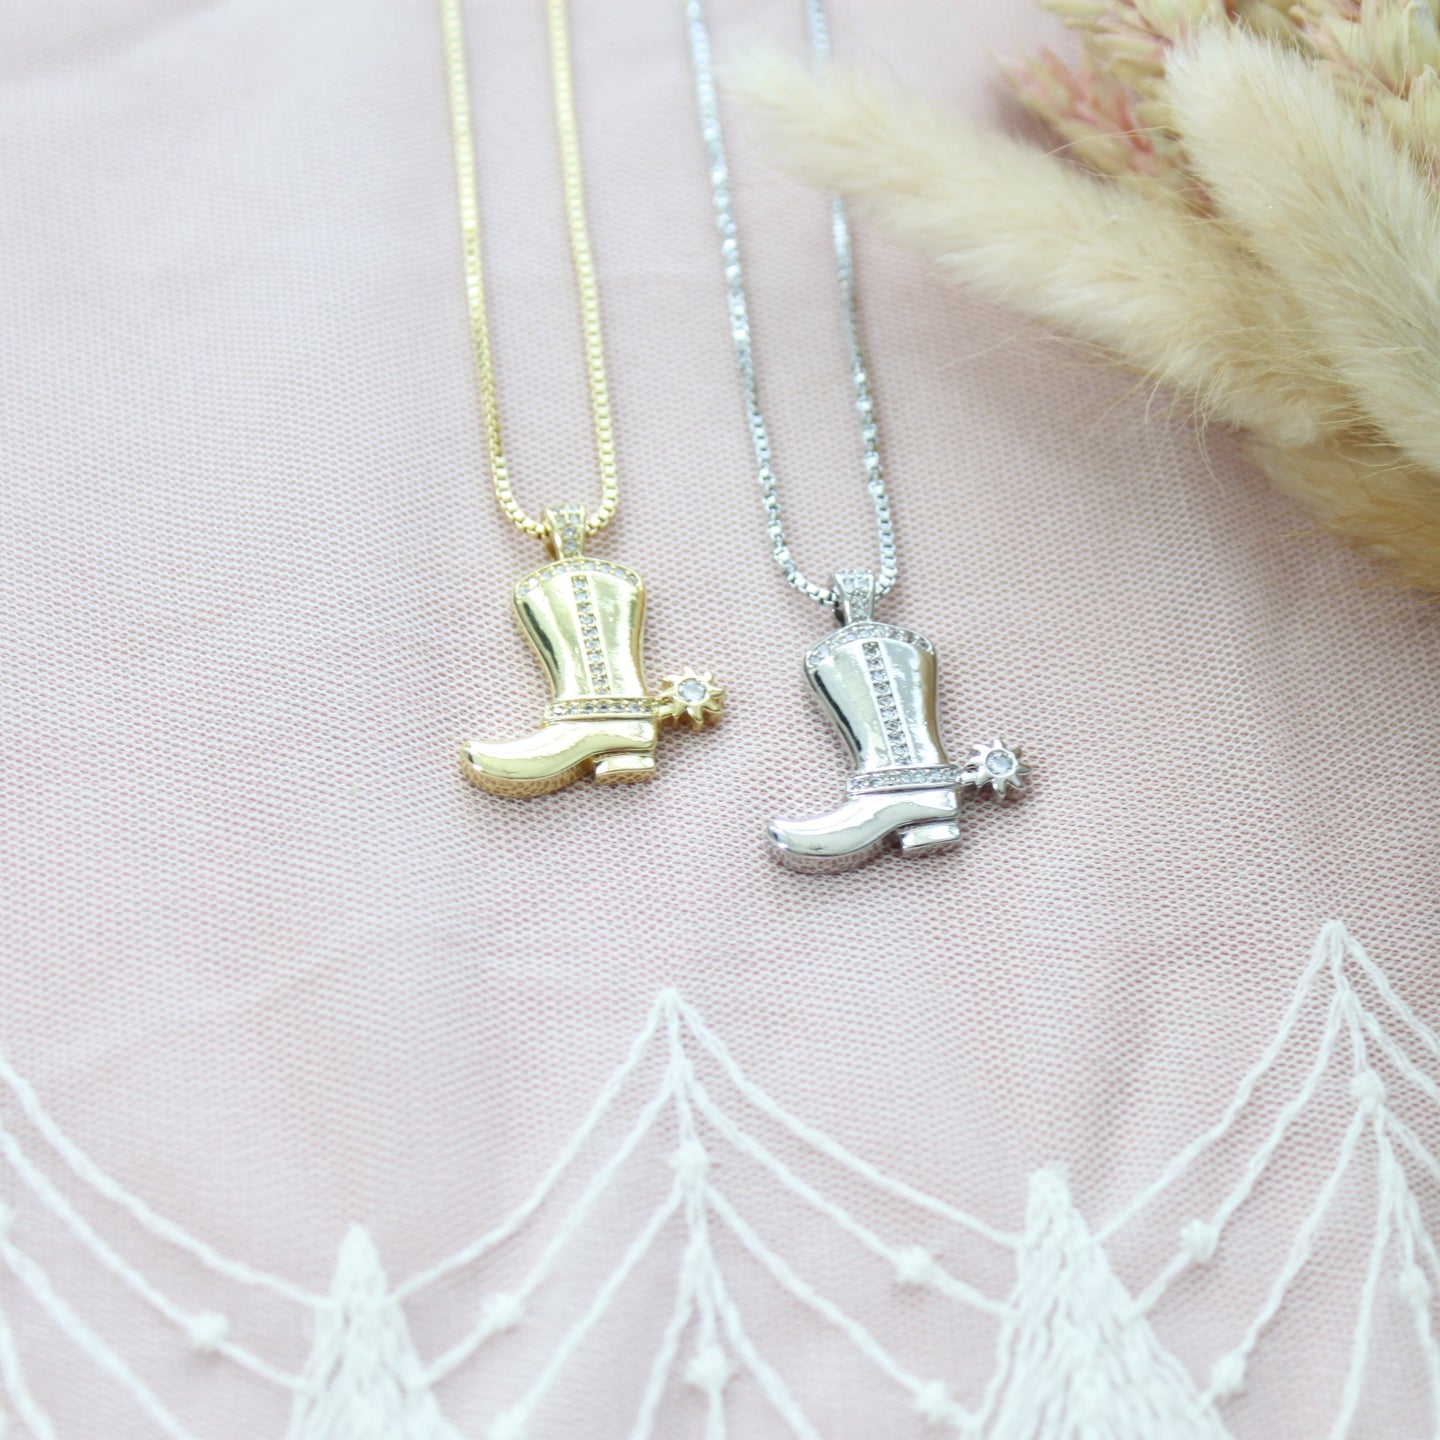 The Stampede Necklace